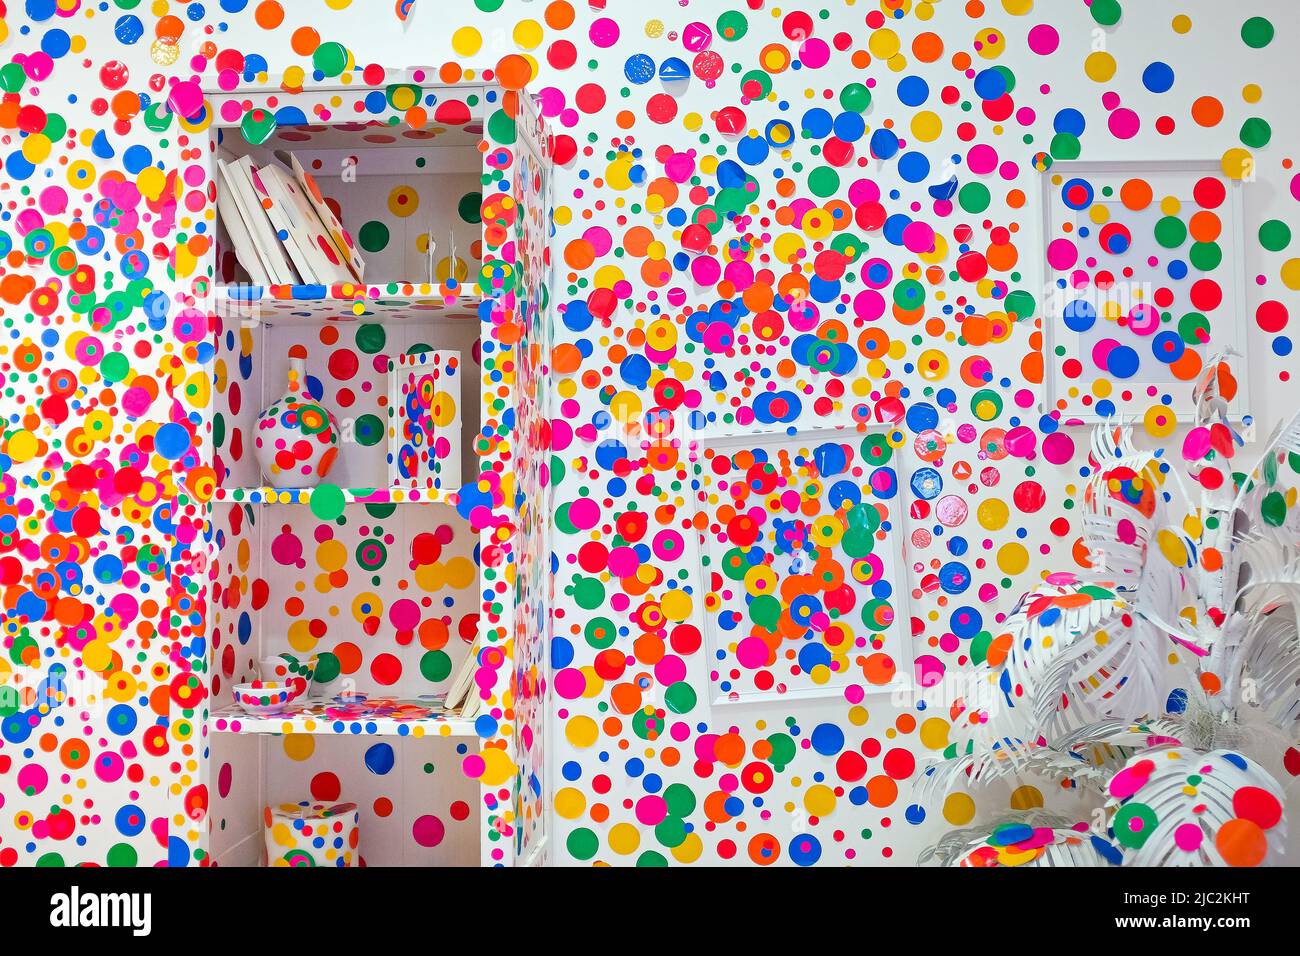 Sharjah, UAE: inside Yayoi Kusama's quirky Obliteration Room. White wall with frames and a bookshelf transformed by visitors with colorful polka dots. Stock Photo